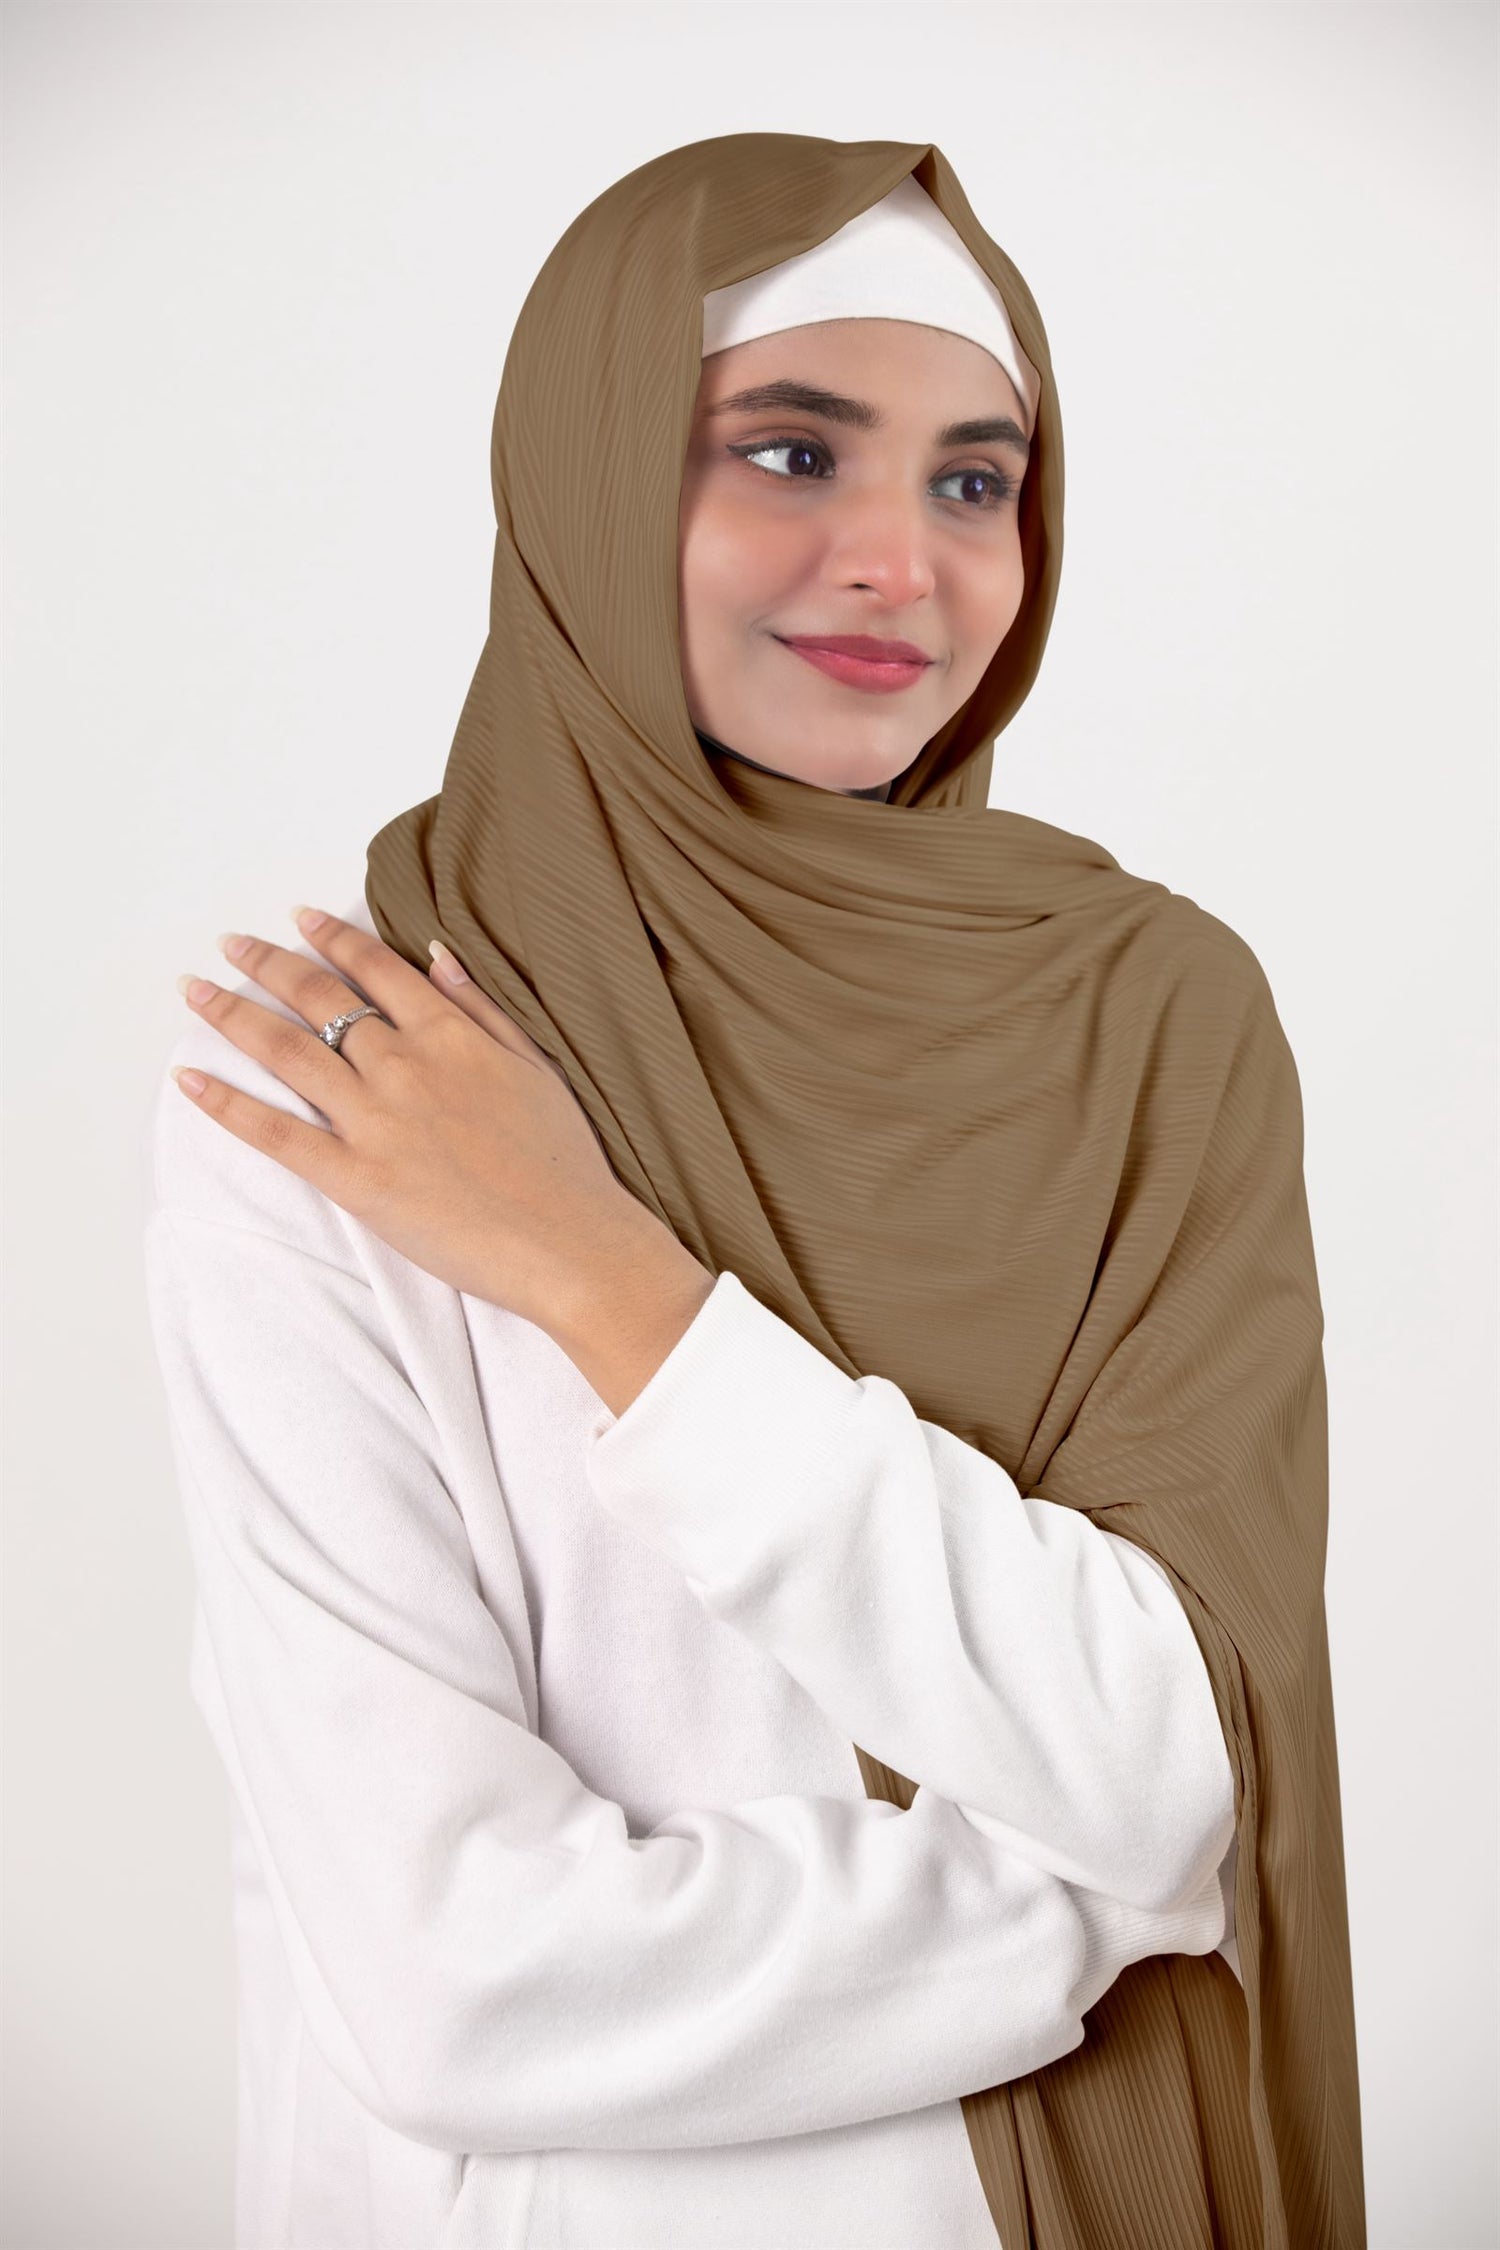 Ribbed Jersey Hijab in Almond